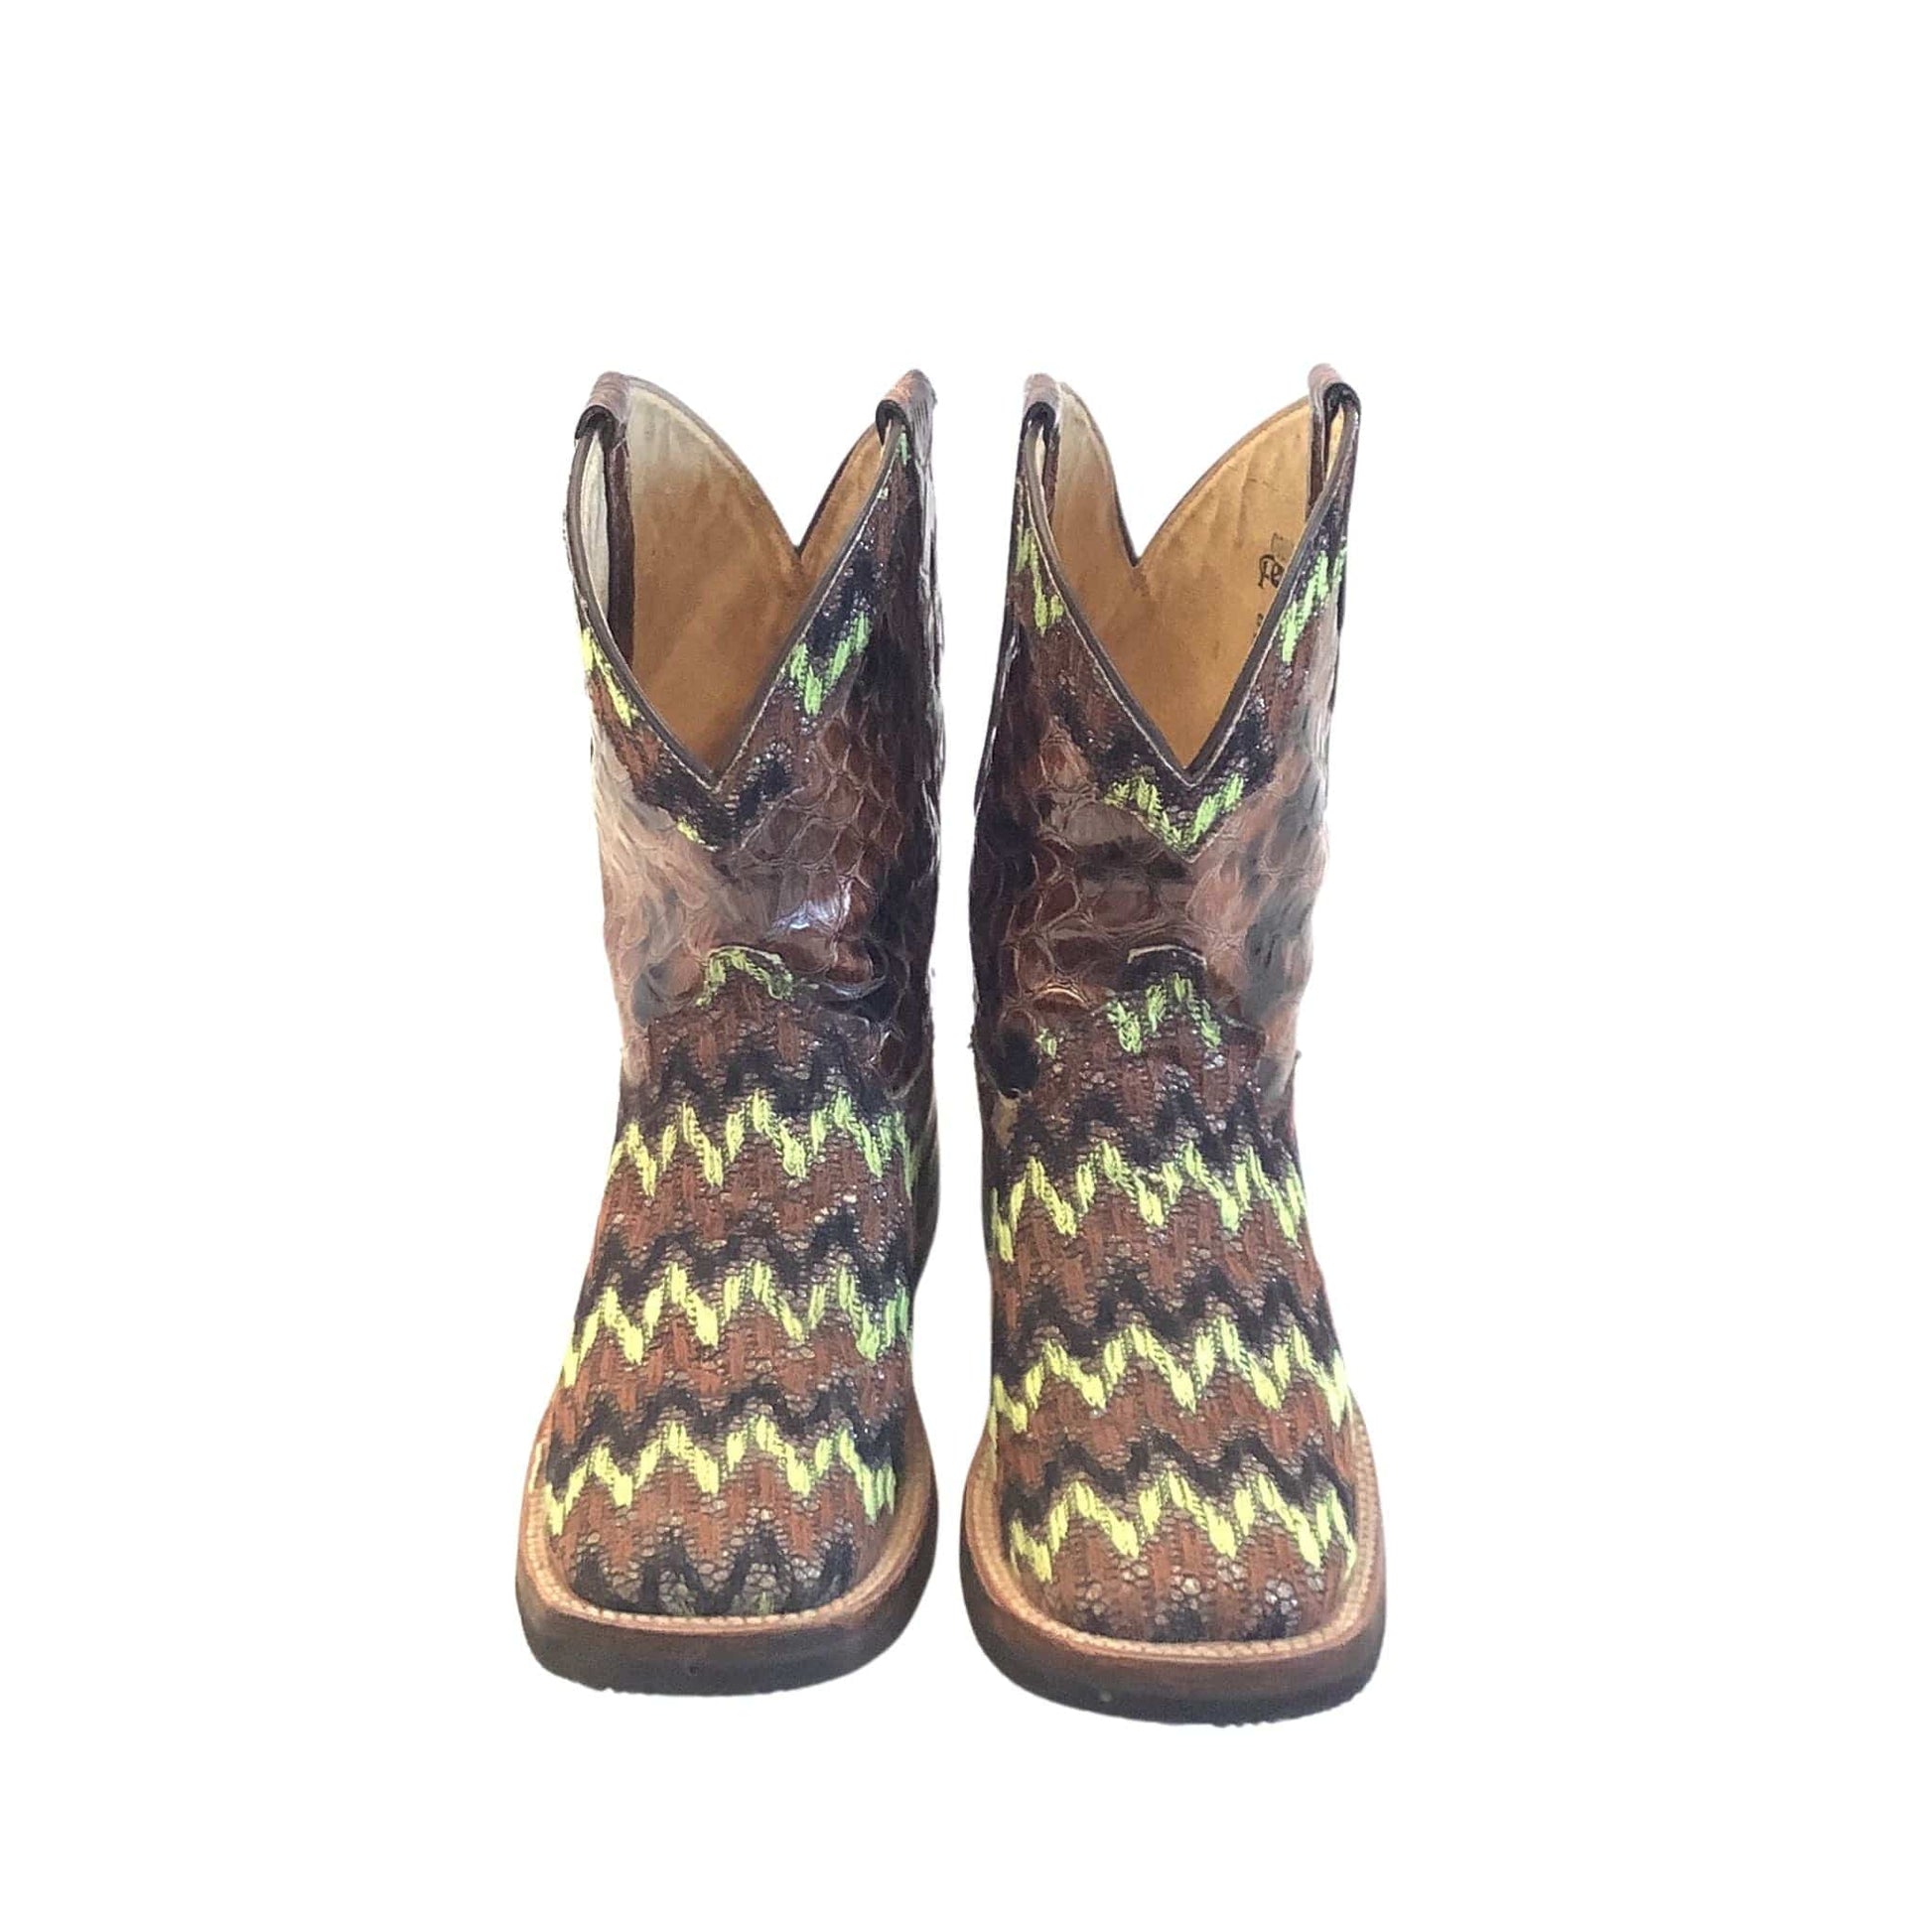 Western Fat-baby Boots 7 / Multi / Y2K - Now